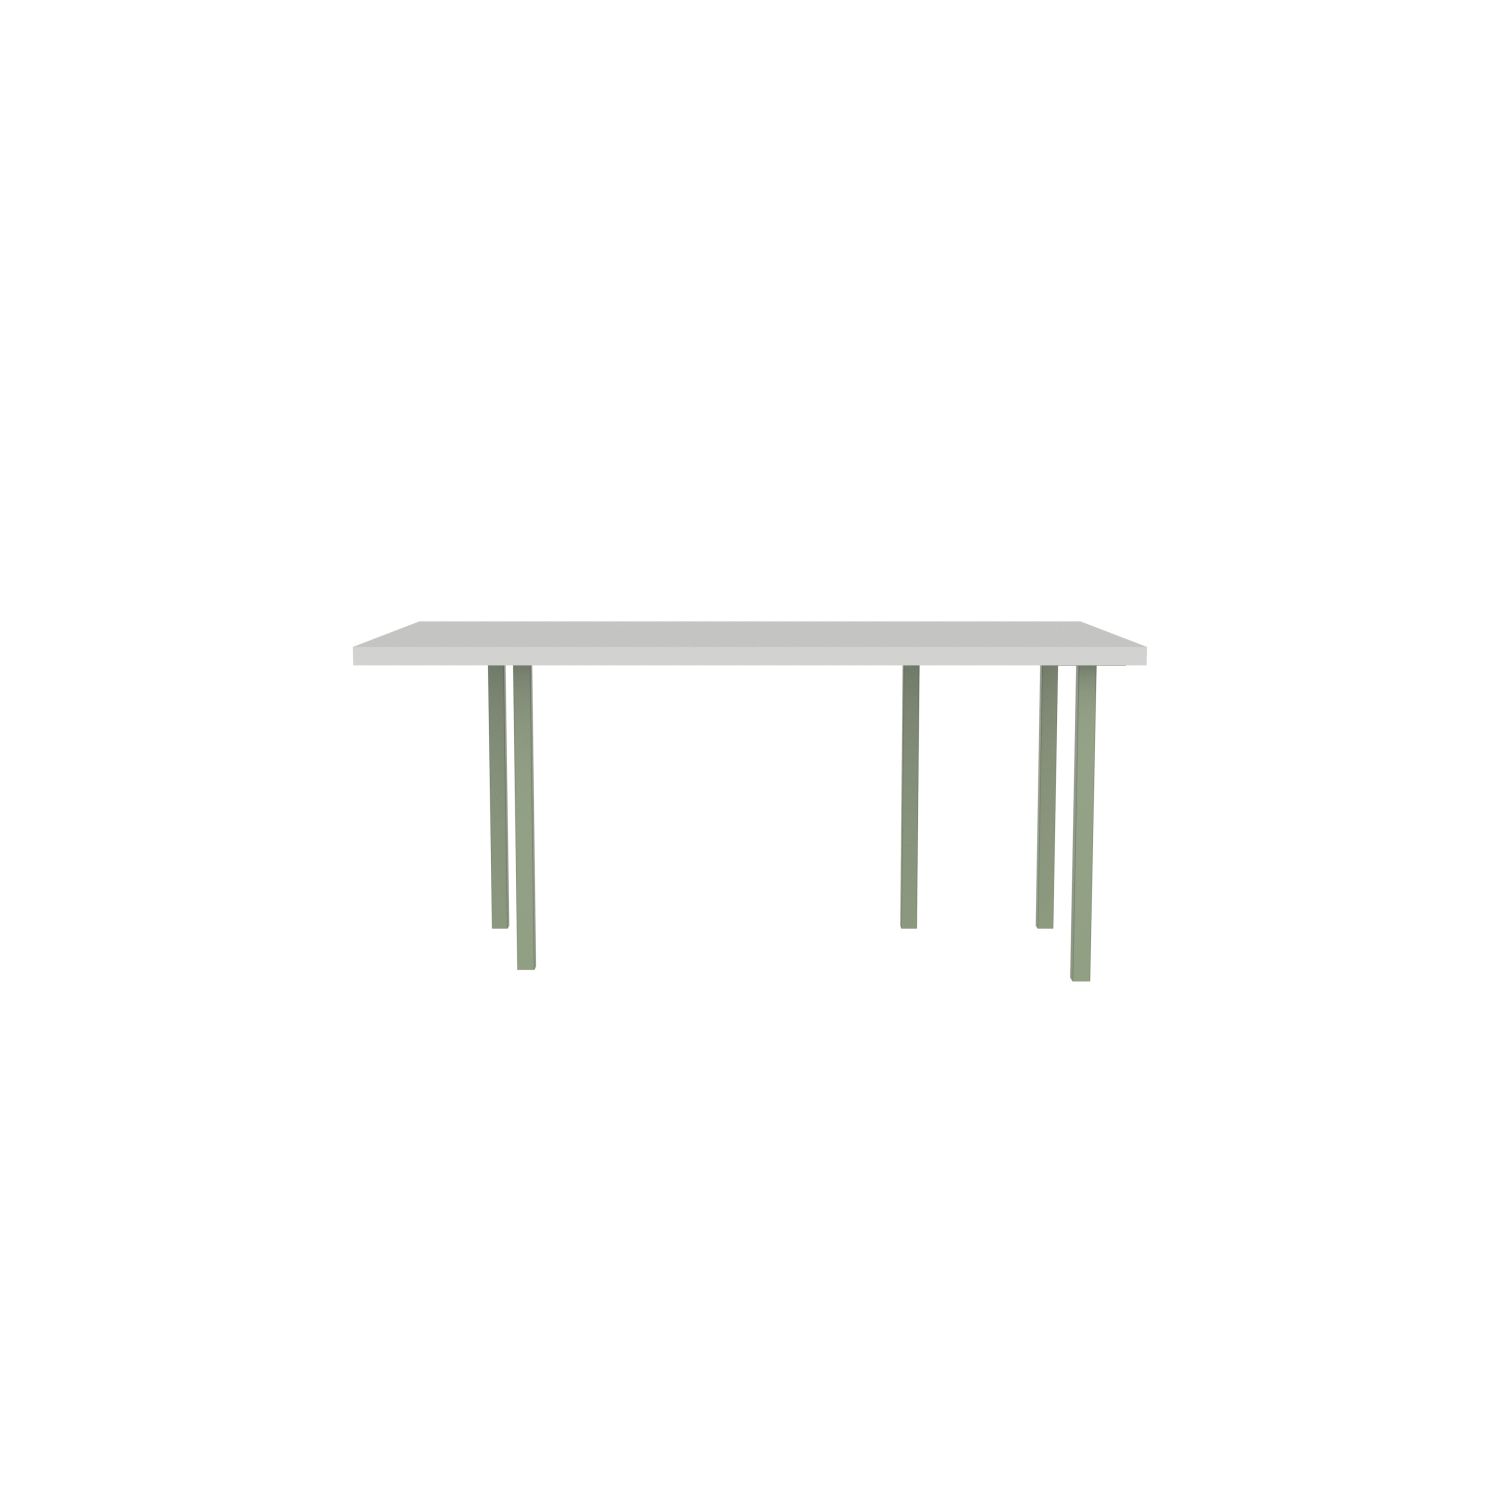 lensvelt bbrand table five fixed heigt 915x172 hpl boring grey 50 mm price level 1 green ral6021